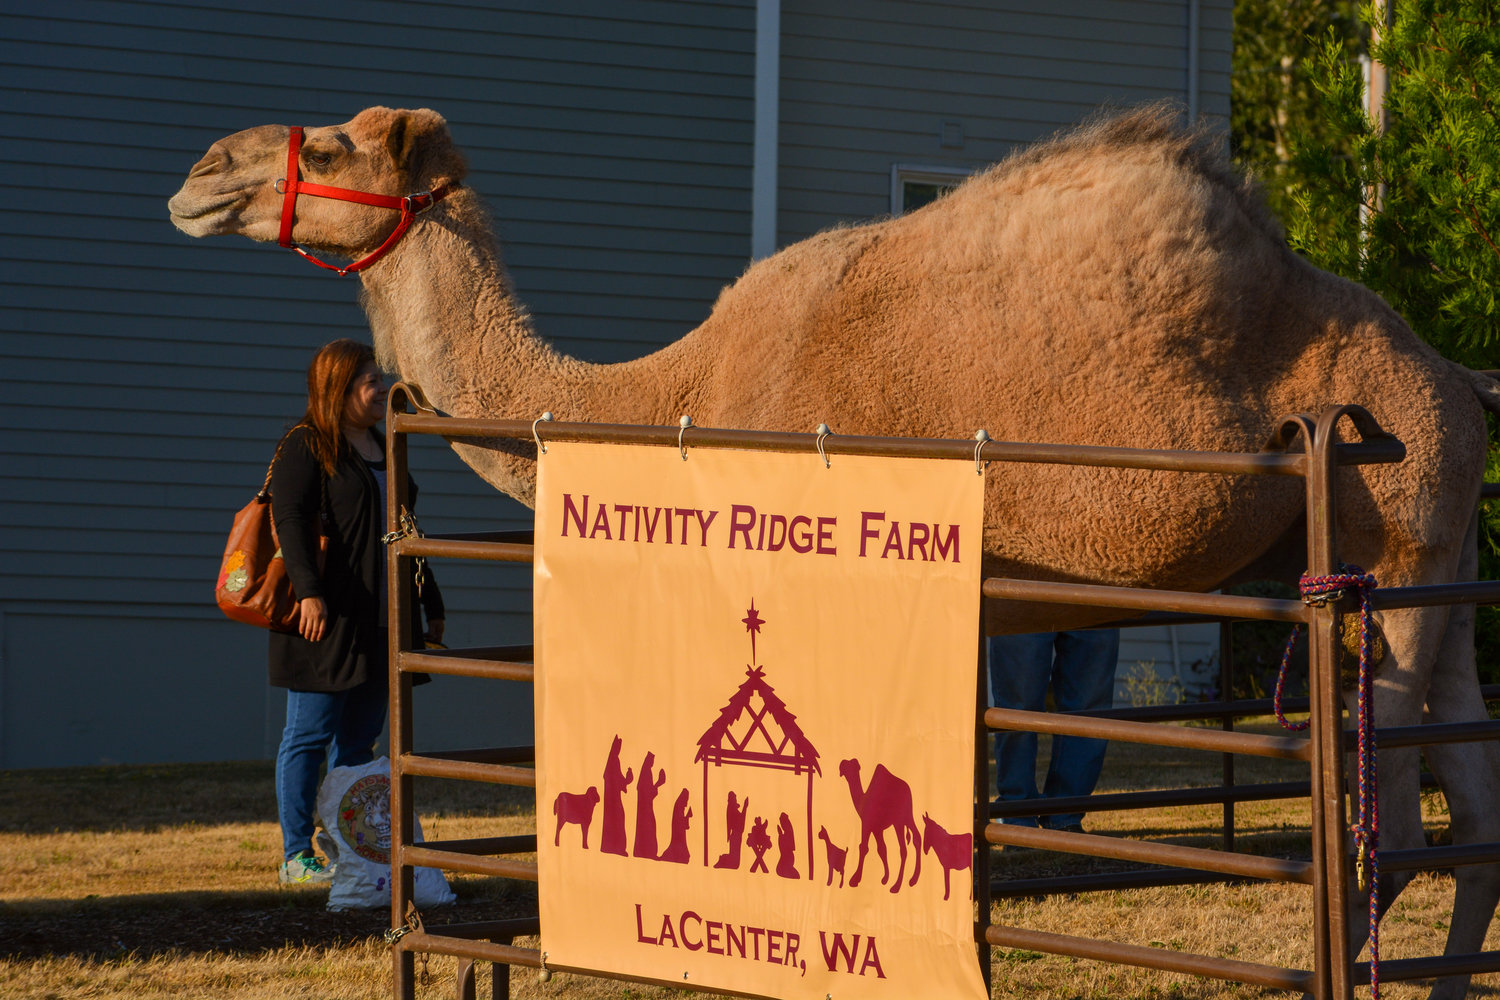 Nativity Ridge Farm brought along some special guests including Curly the Camel for the Jeremy Duggins Welcome Home event on Monday night, Aug. 23 in Hockinson.